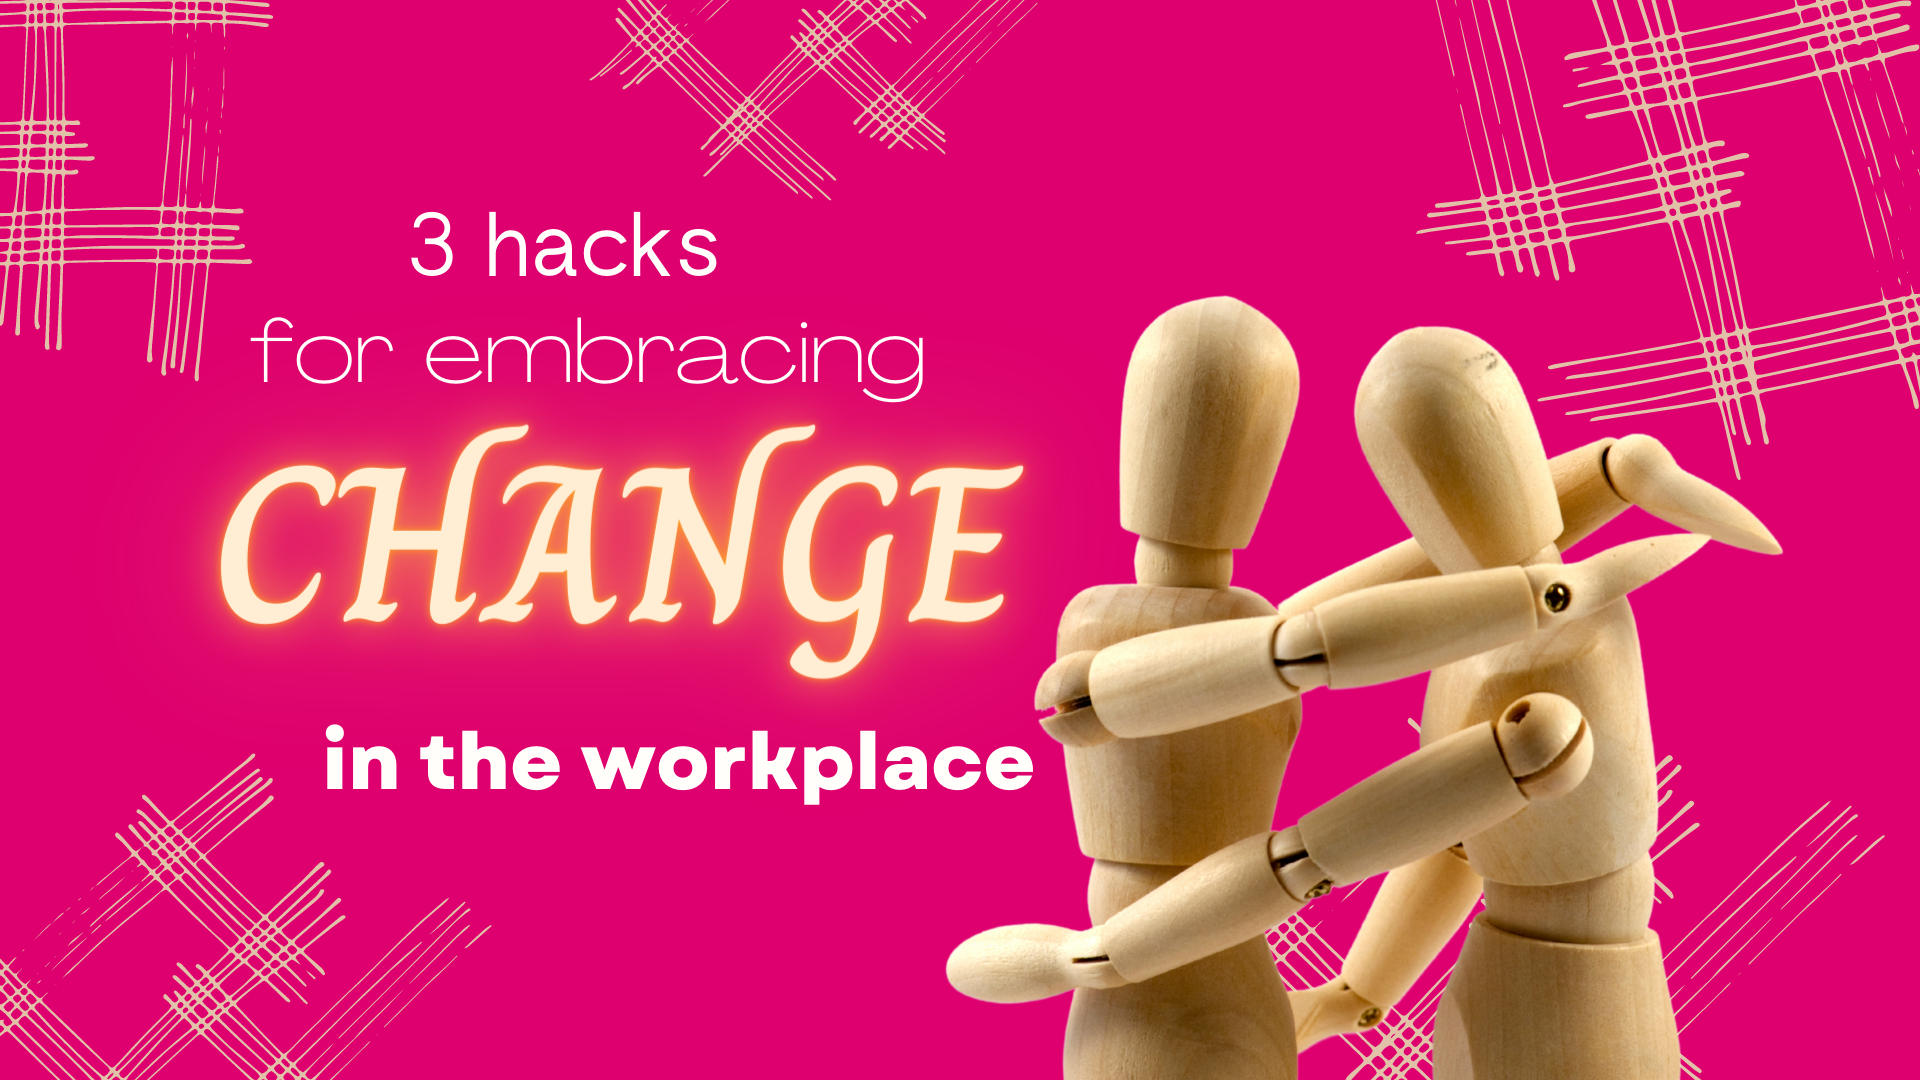 3 hacks for embracing change in the workplace!